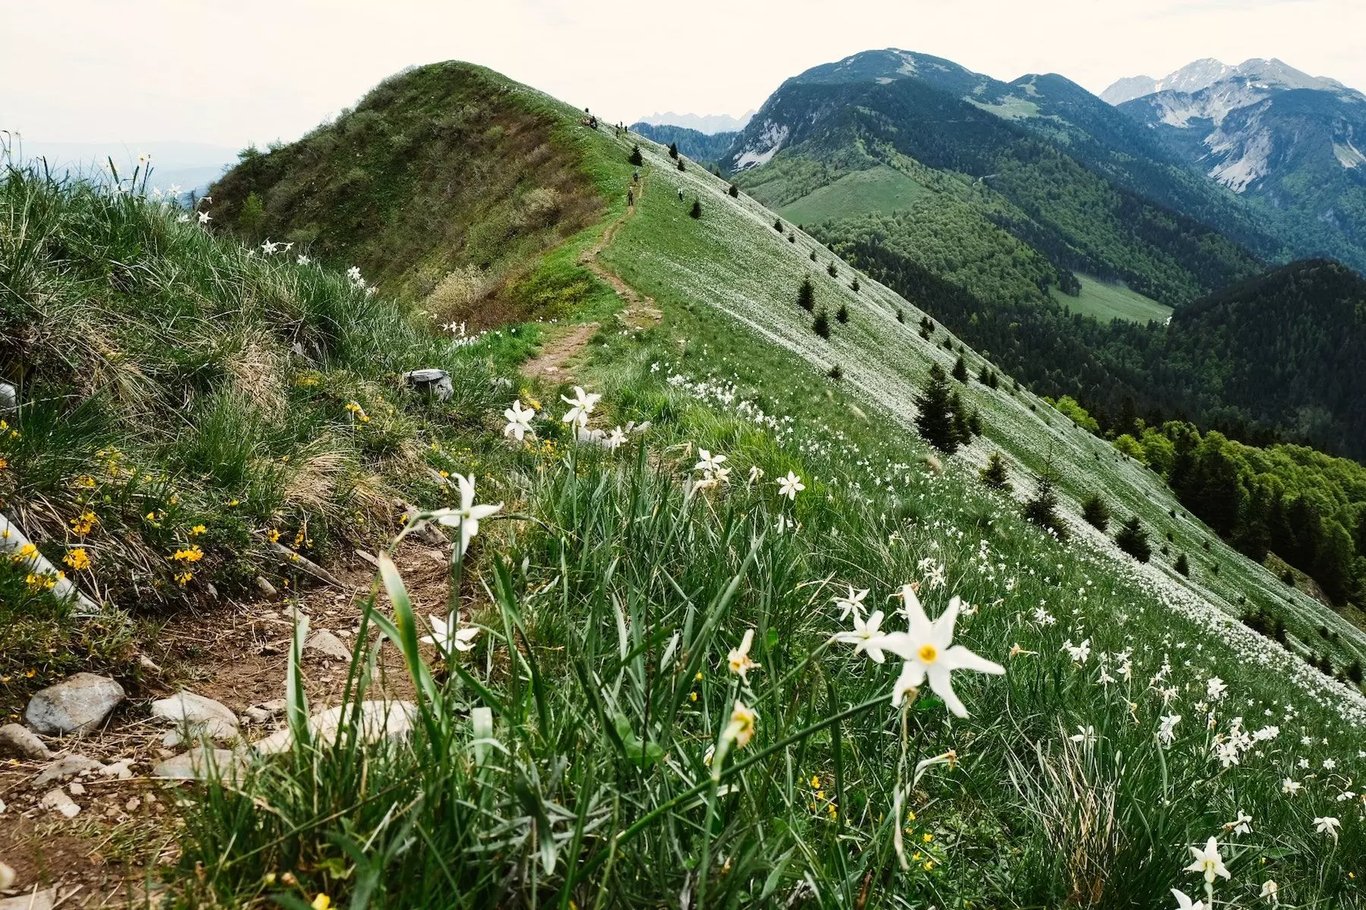 Golica (1,836 m) Slovenia Guide - Home of The Endless Daffodils